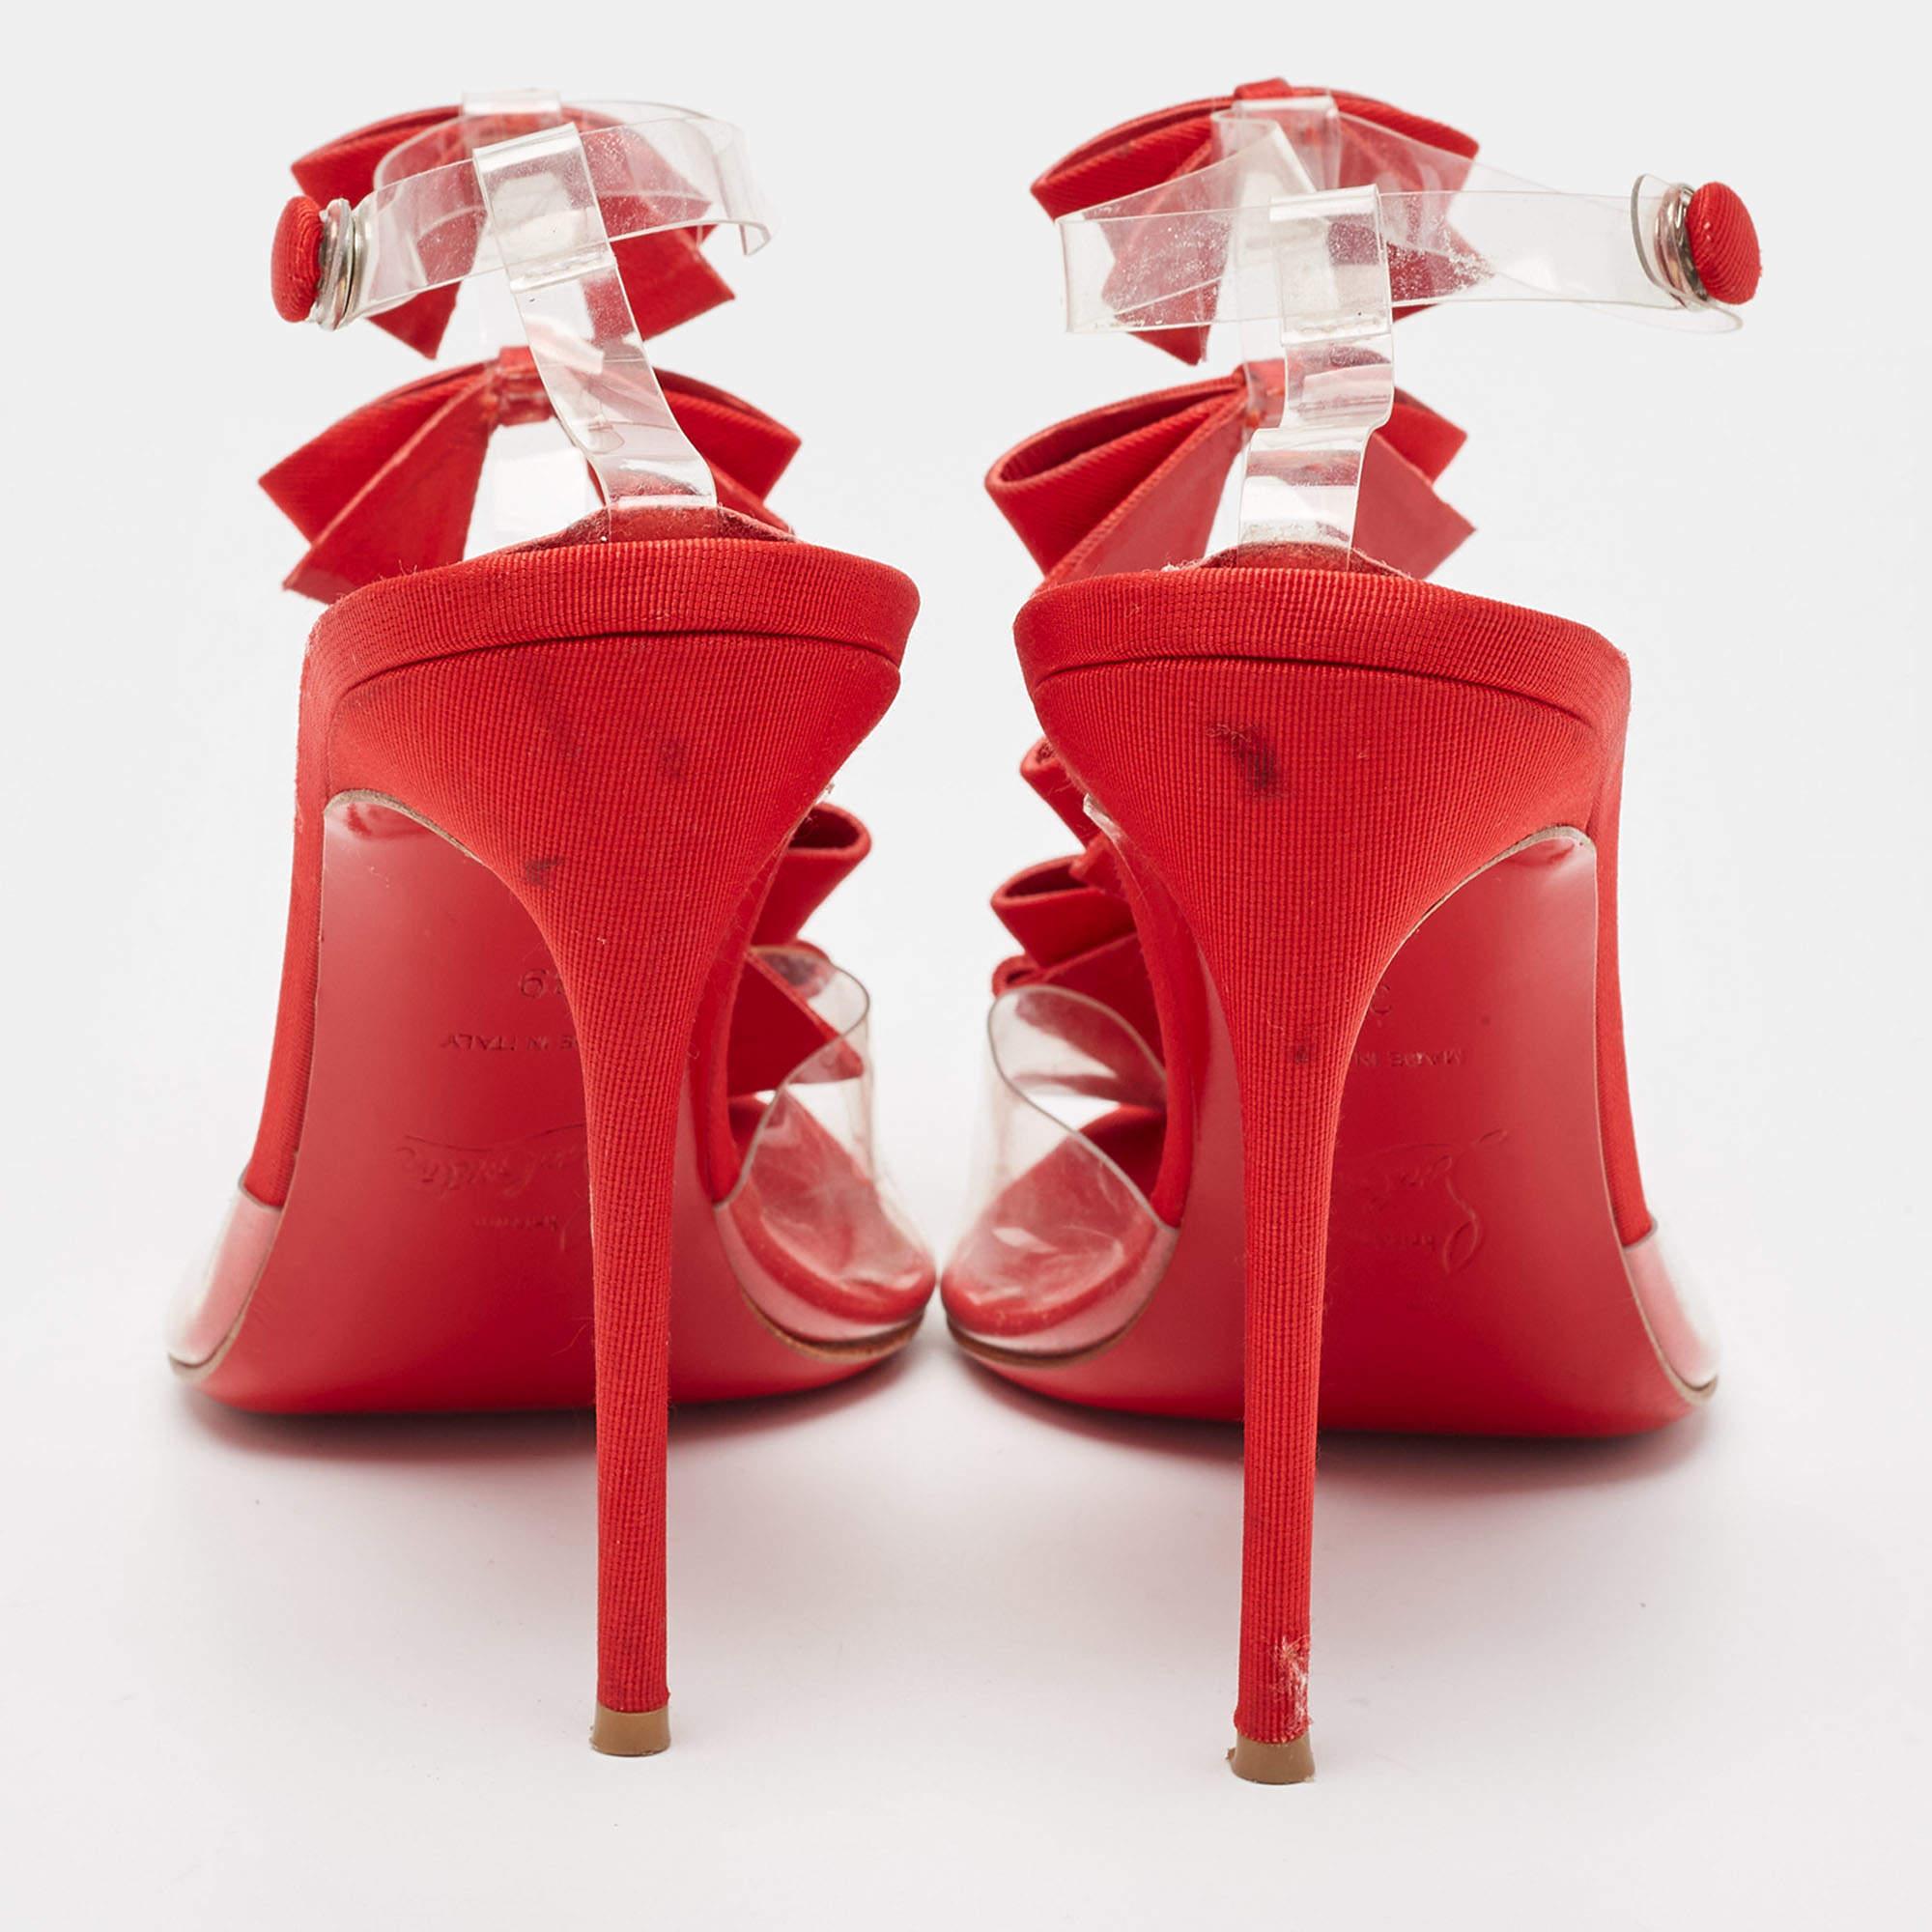 Christian Louboutin Red/Transparent Fabric and PVC Bow Bow Ankle Strap Sandals S 4